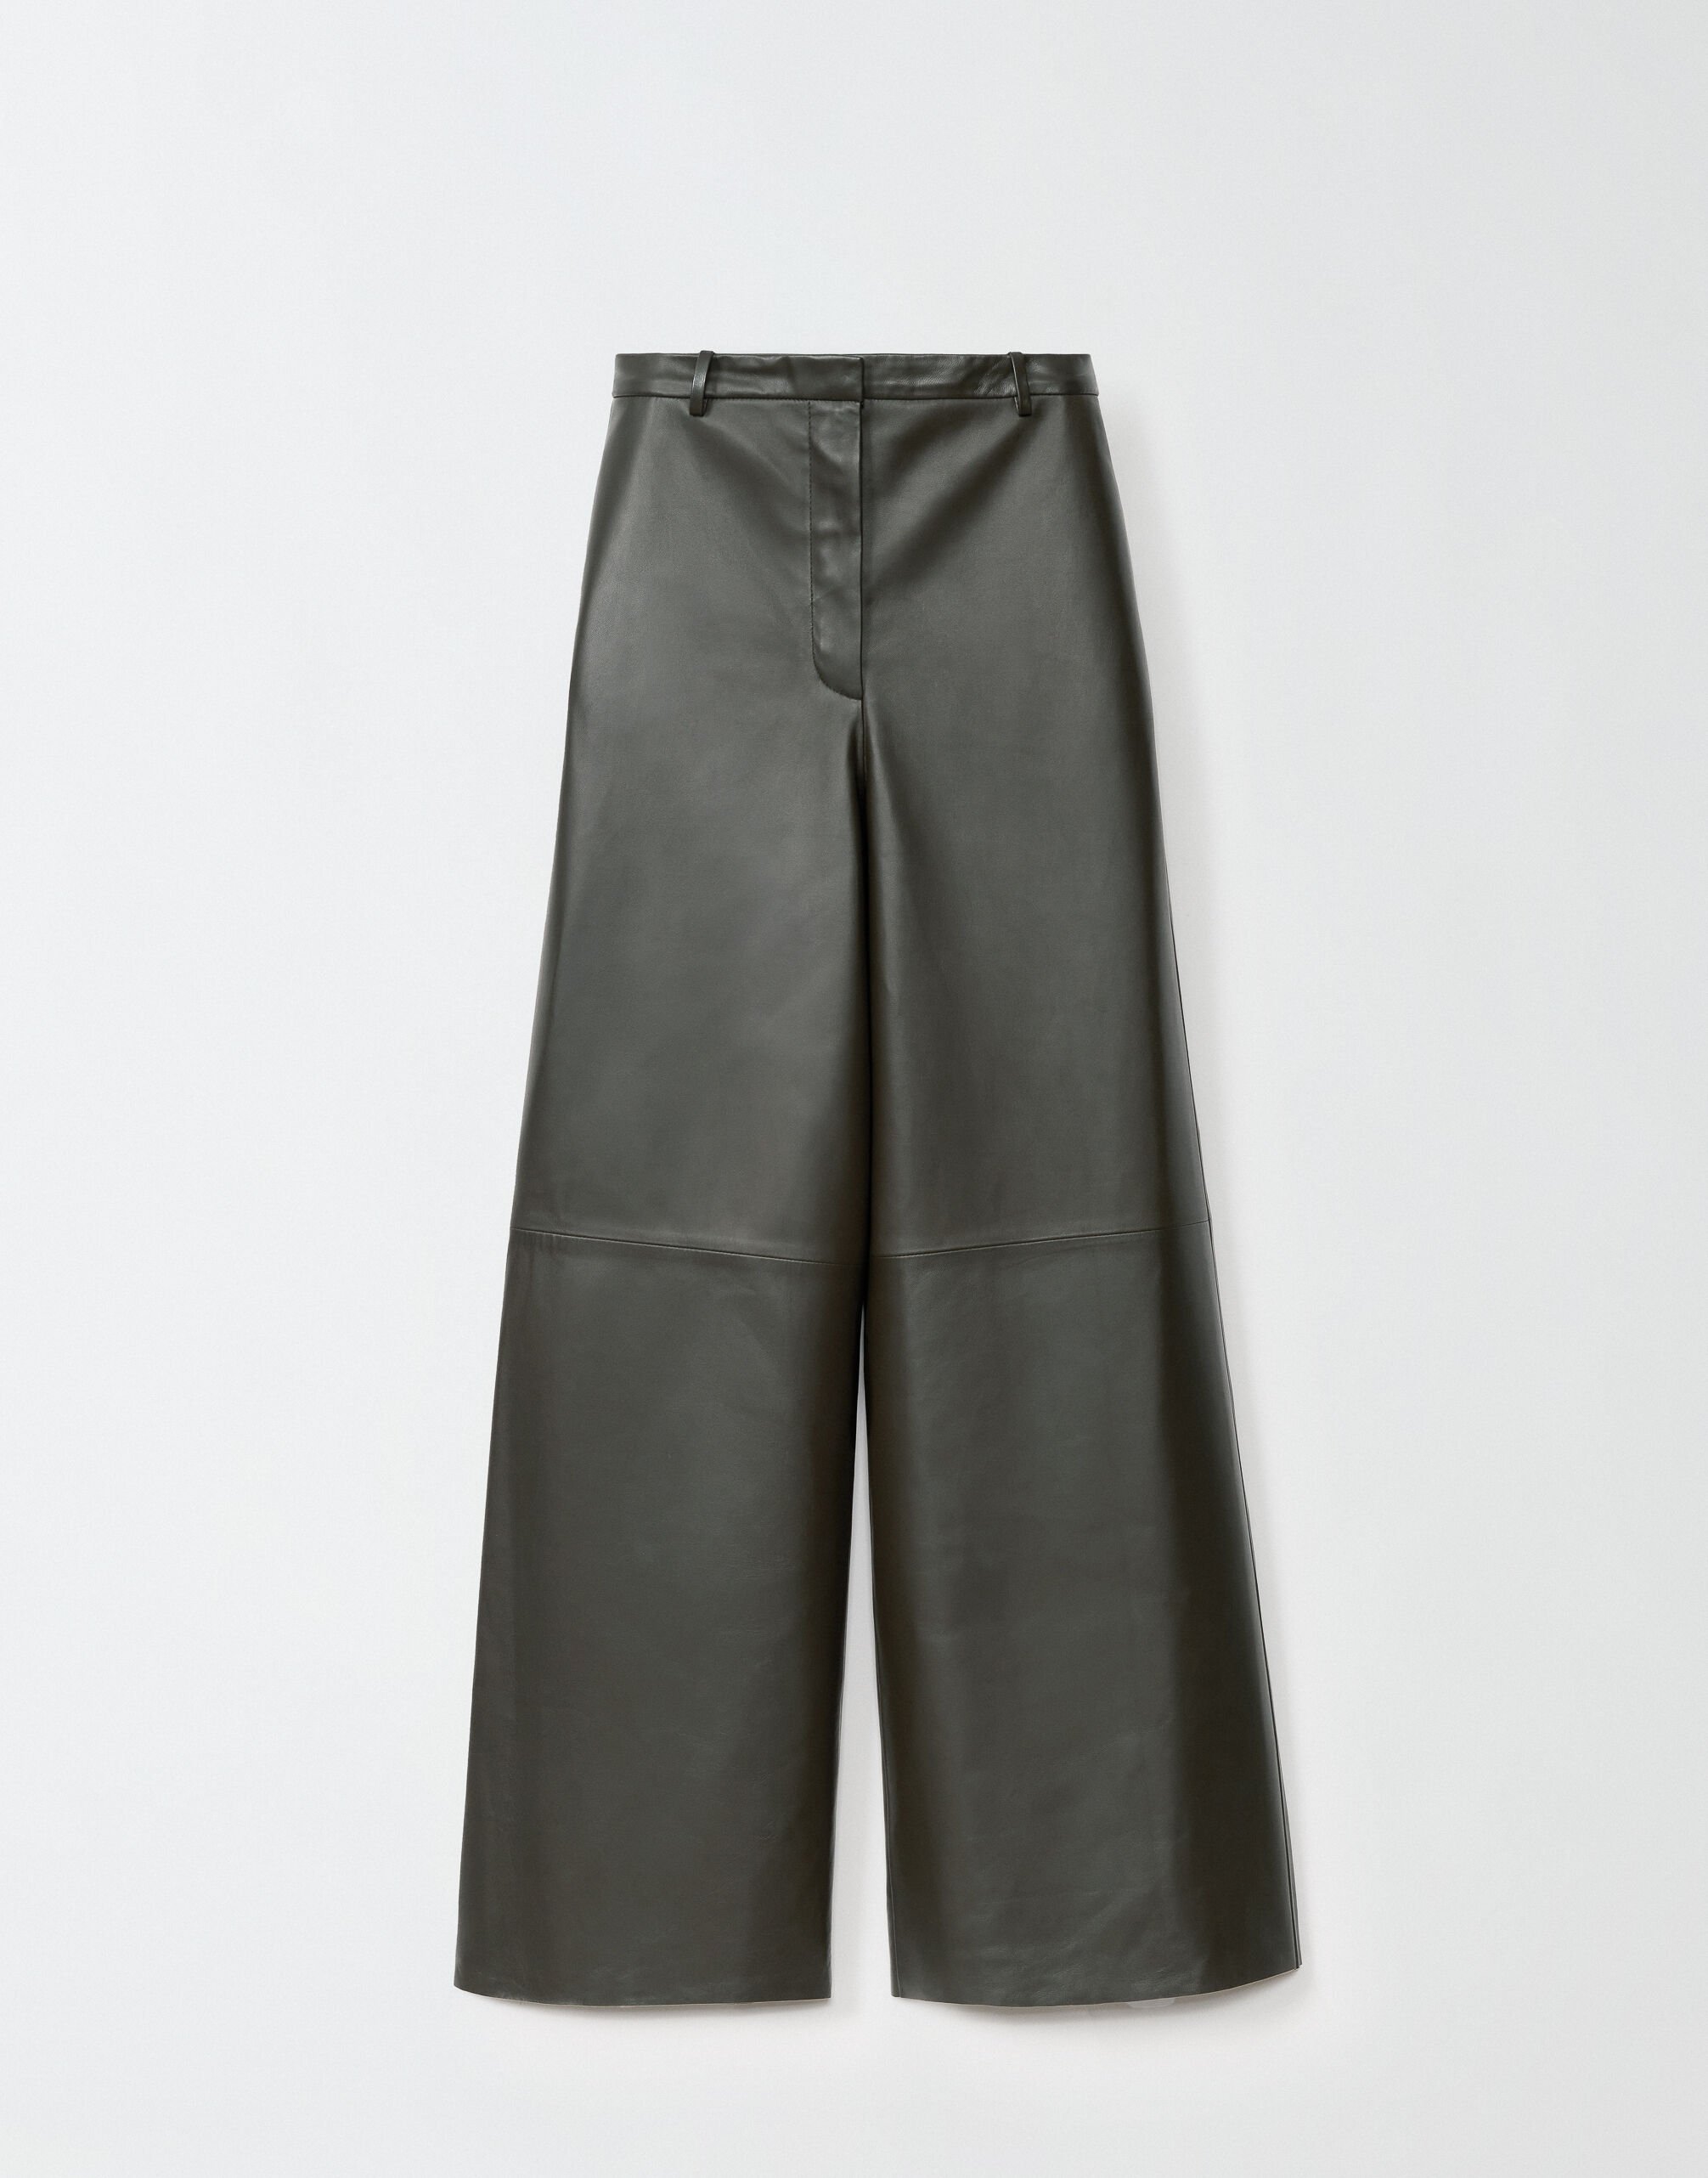 ${brand} Nappa leather trousers, olive ${colorDescription} ${masterID}